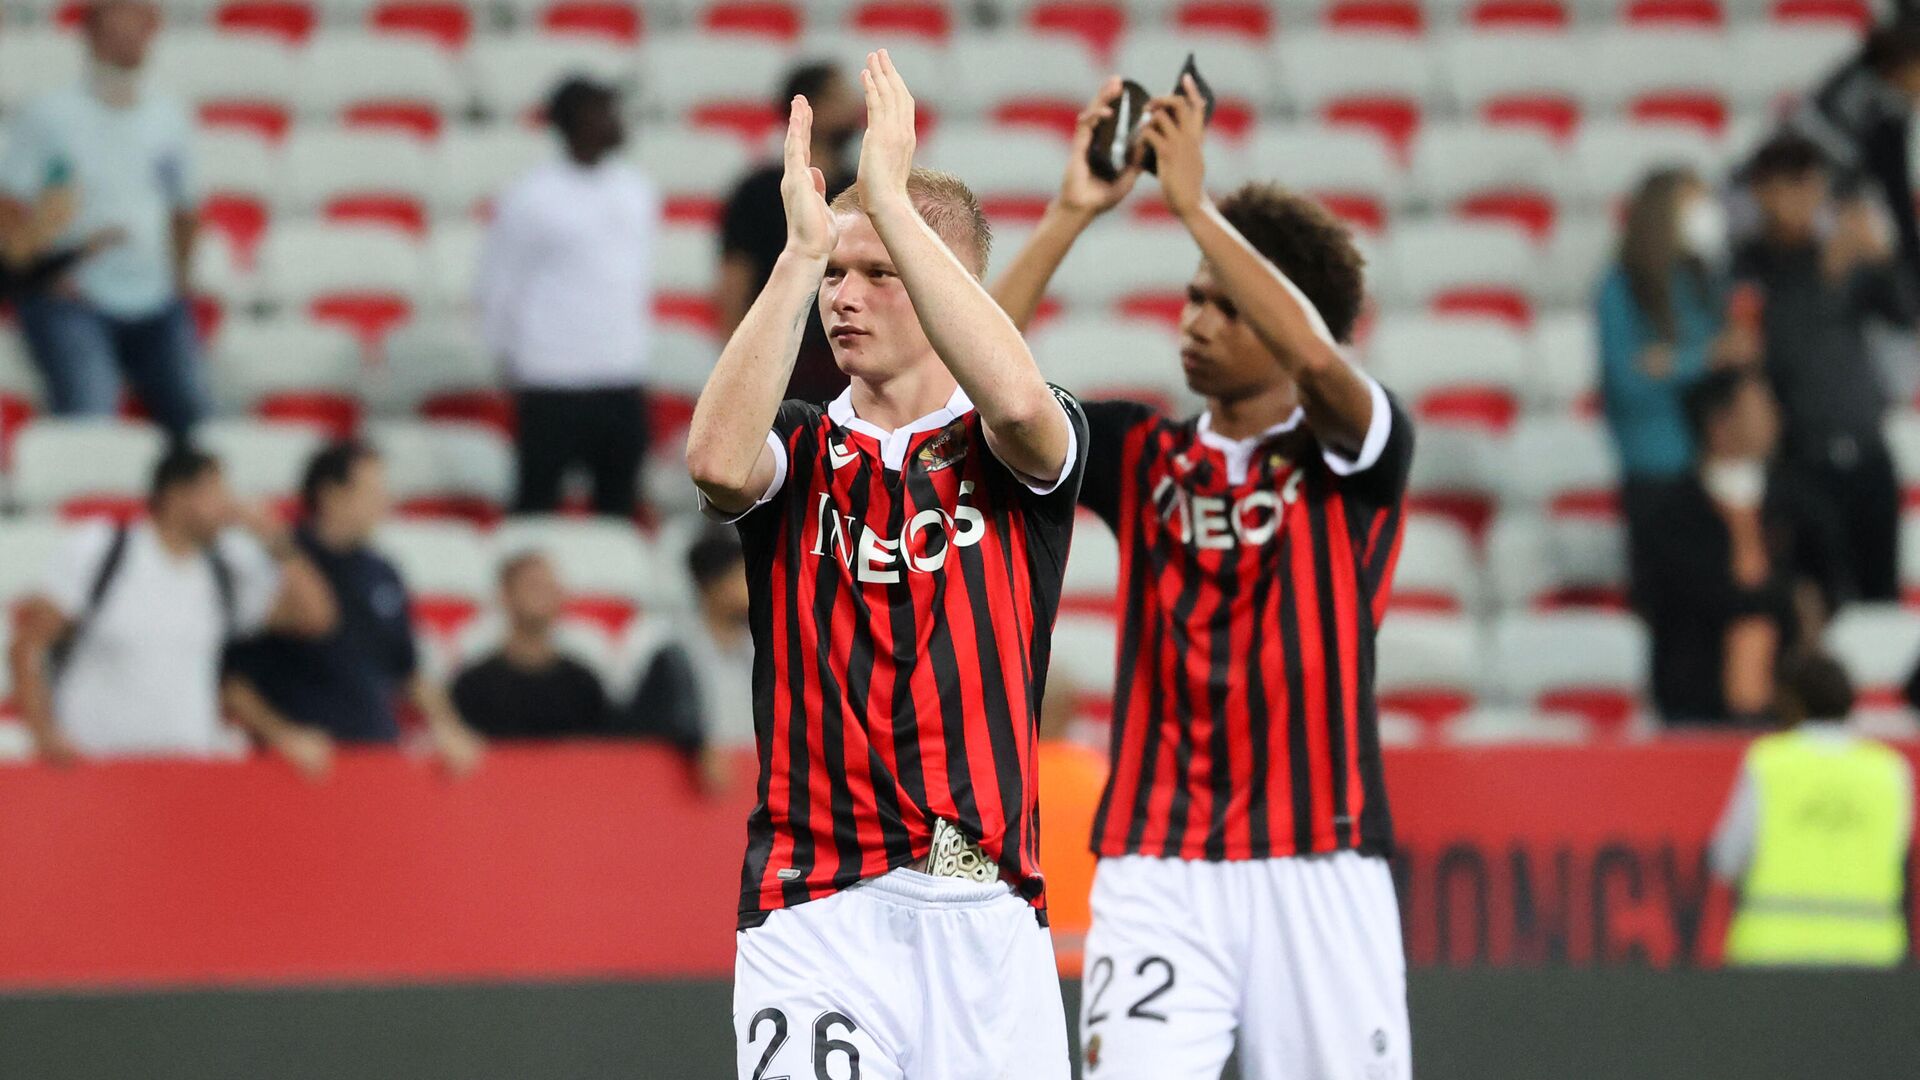 Nice's French defender Melvin Bard (L) and Nice's Dutch forward Calvin Stengs react after their victory during the French L1 football match between OGC Nice and Brest at The Allianz Riviera Stadium in Nice, south-eastern France, on October 2, 2021. (Photo by Valery HACHE / AFP) - РИА Новости, 1920, 03.10.2021